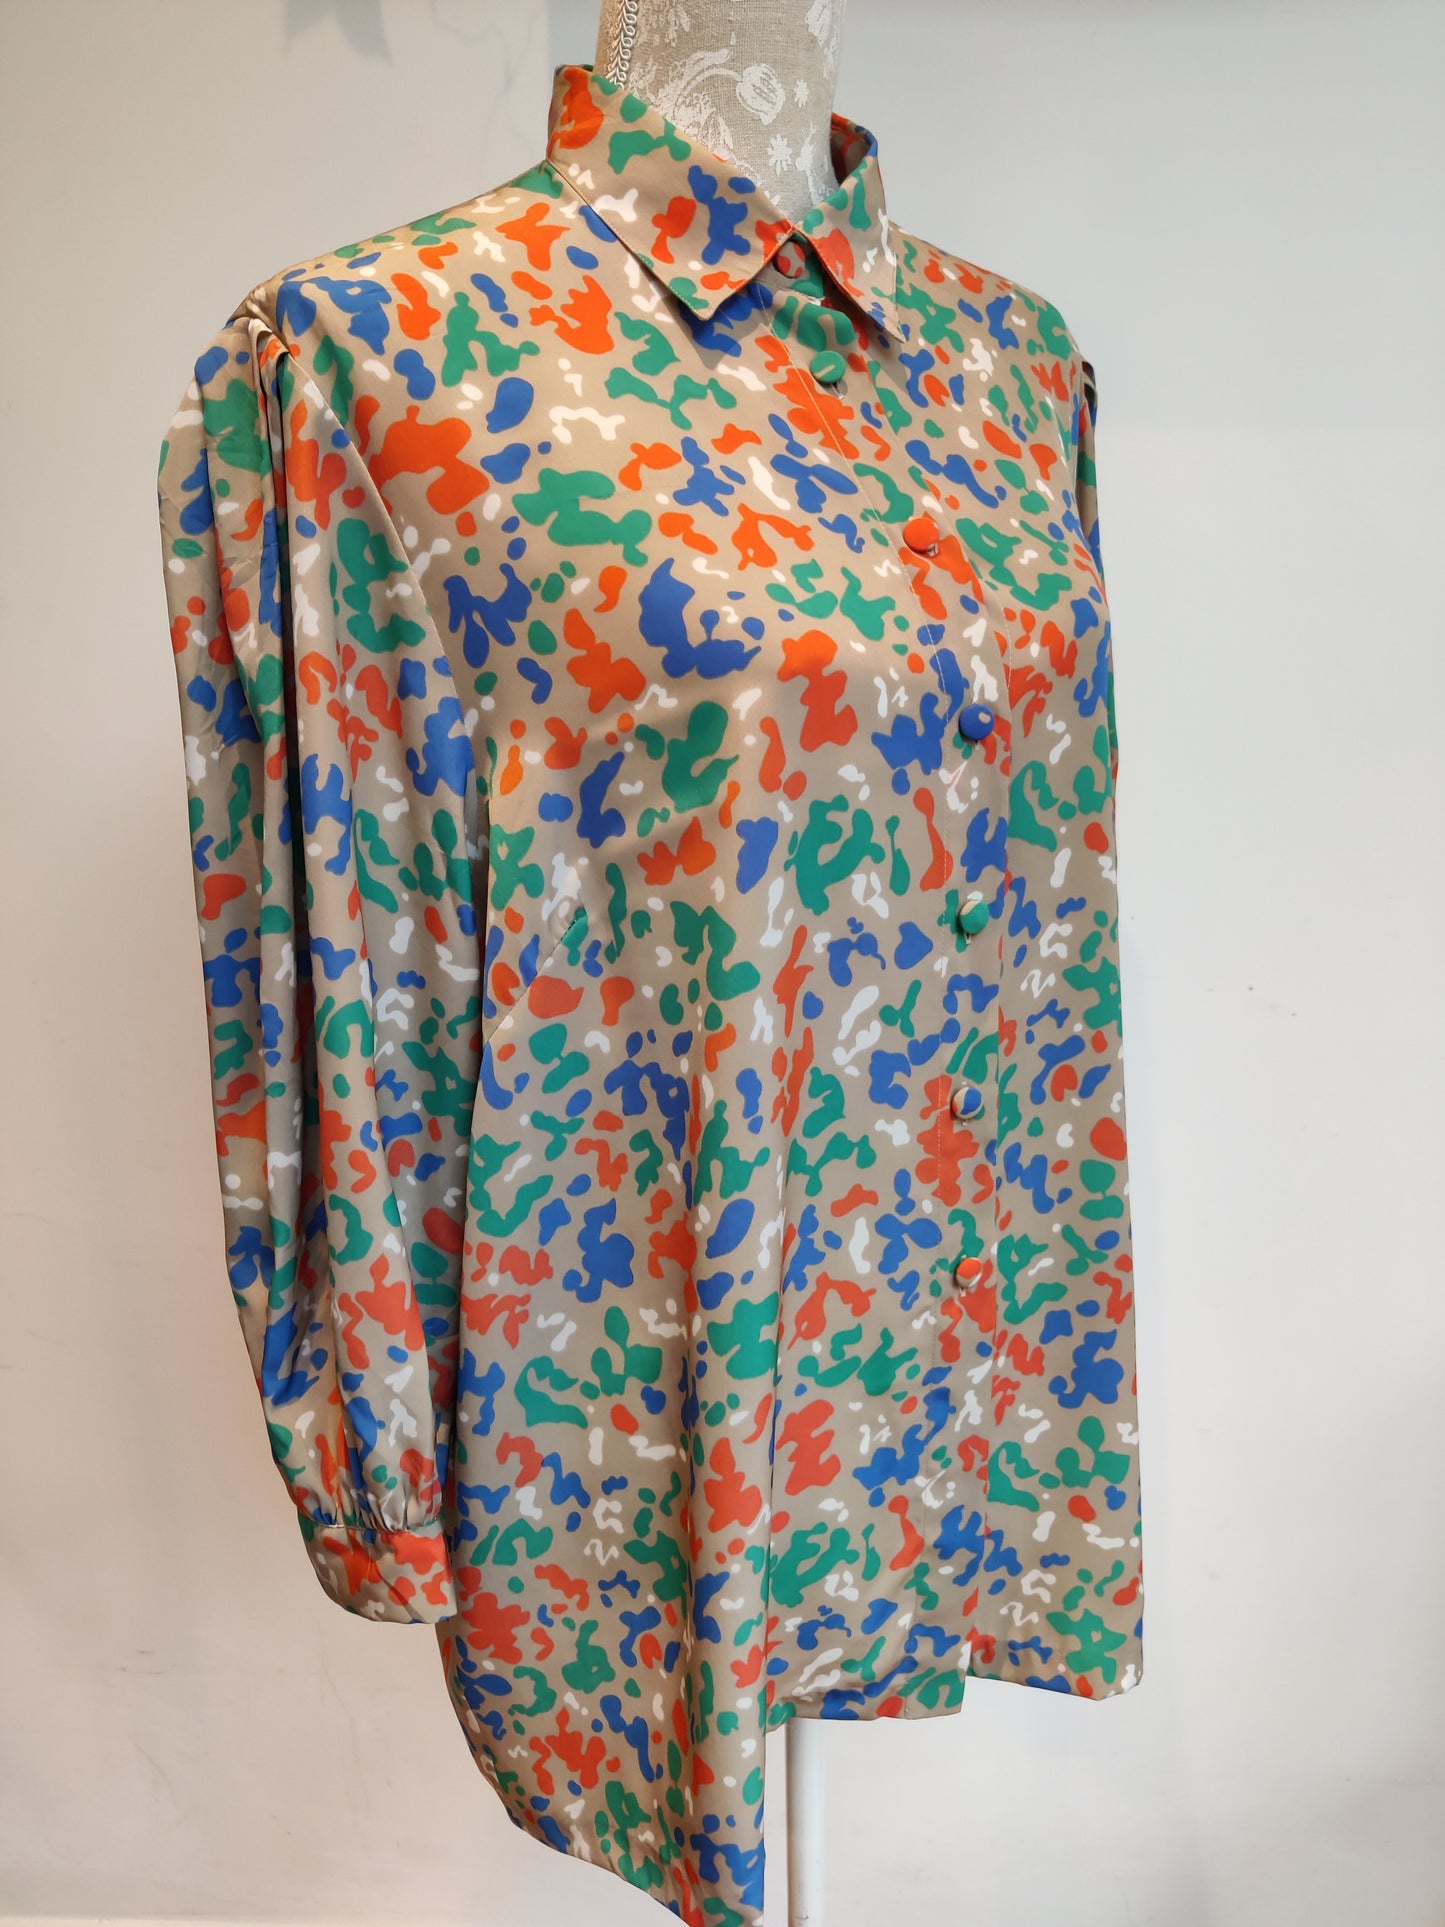 Orange, blue and green camouflage shirt